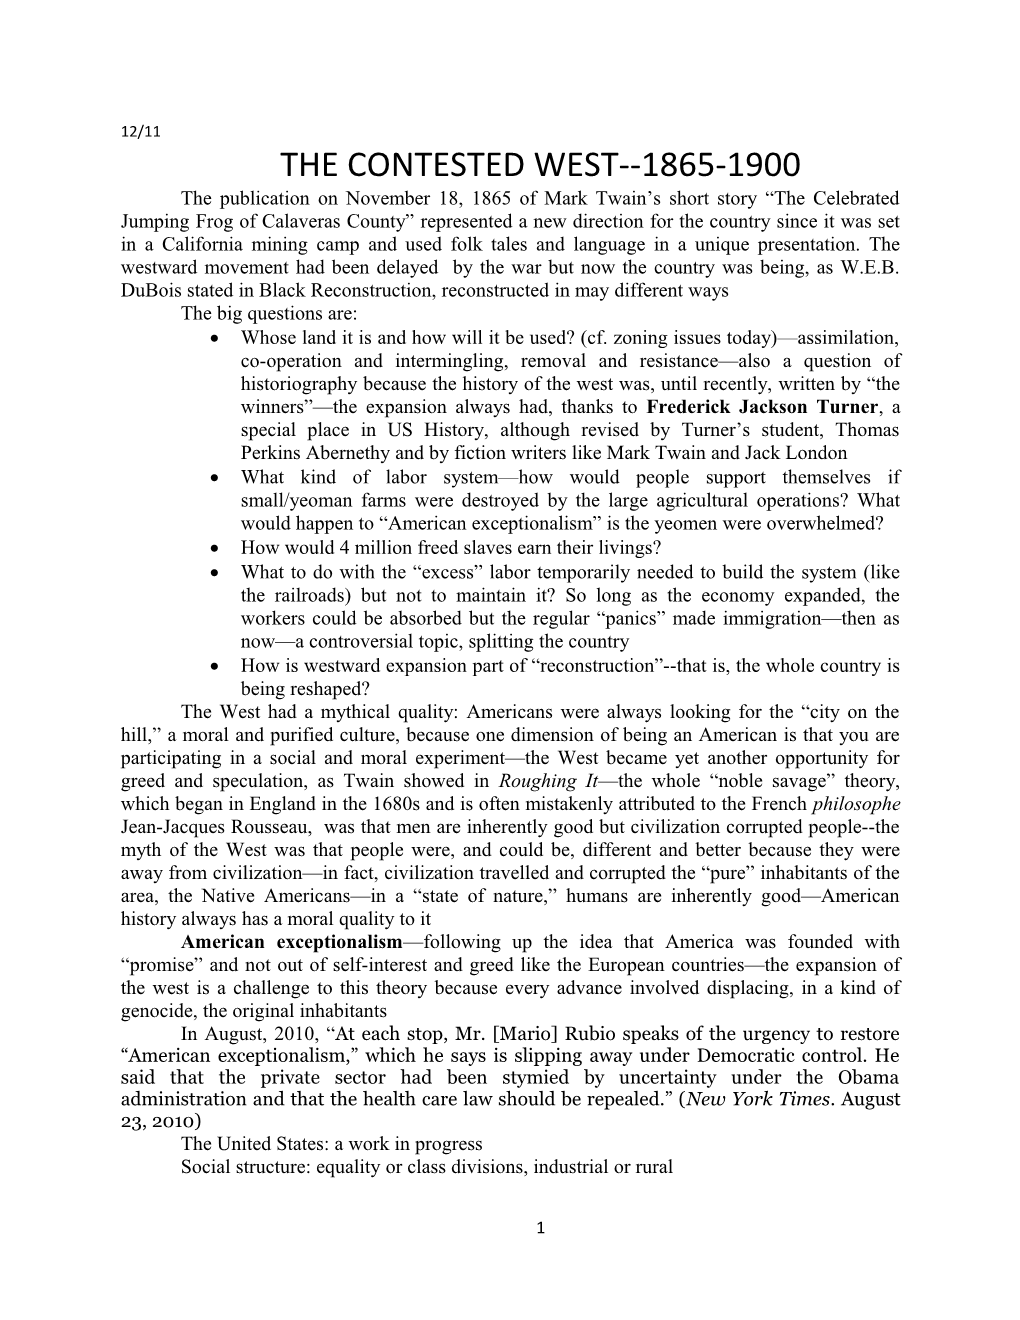 The Contested West 1865-1900